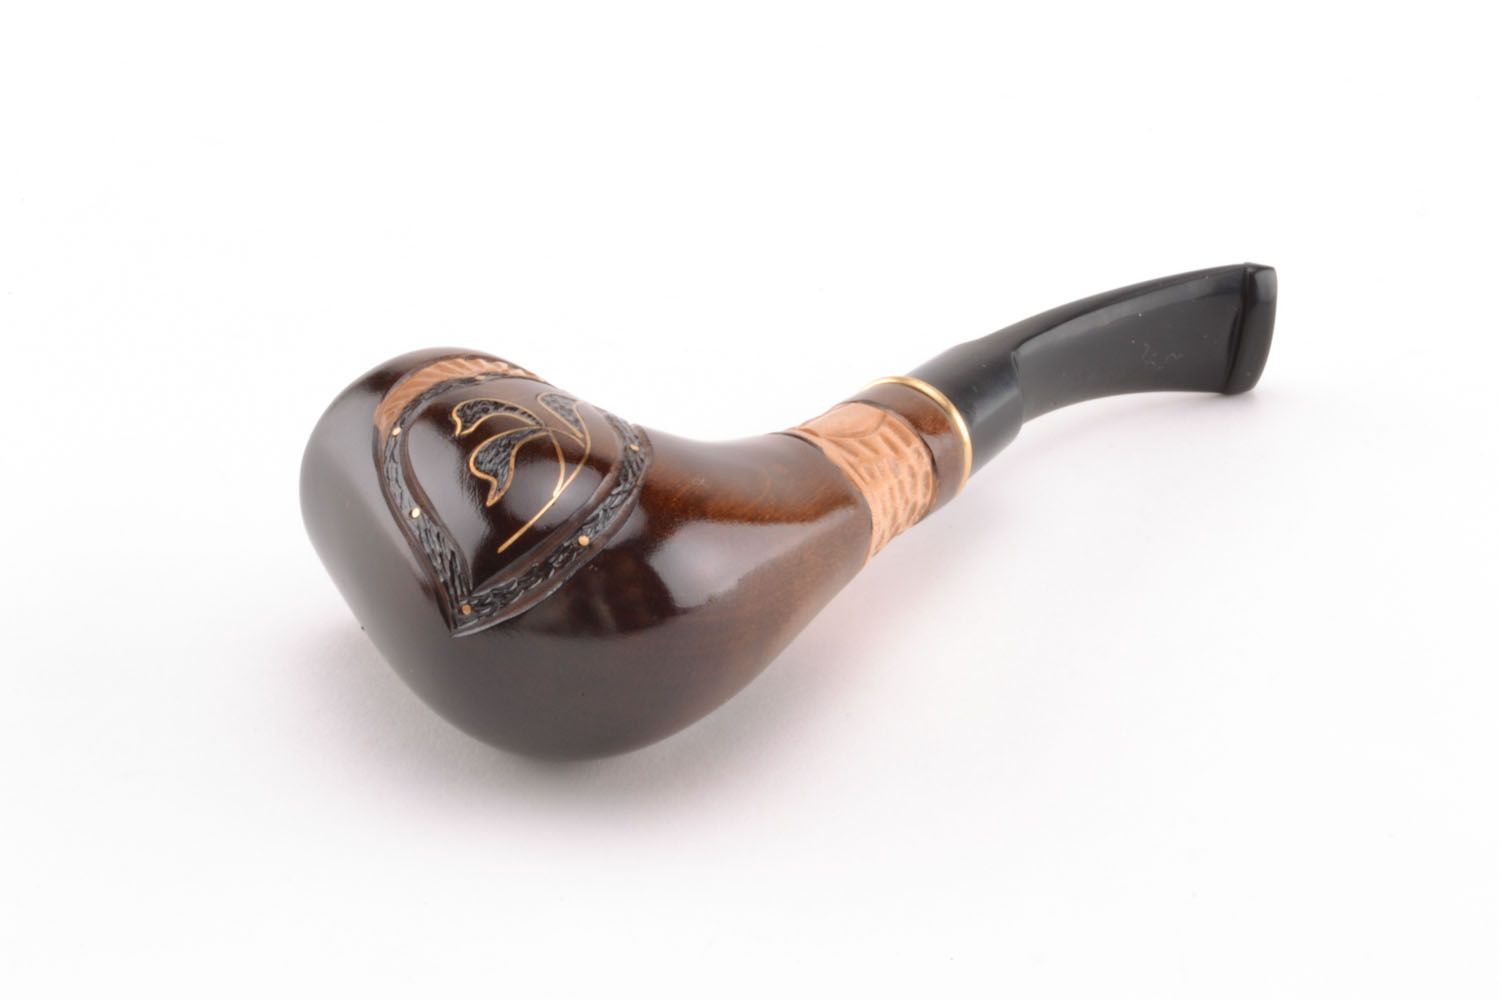 Wooden smoking pipe for decorative use only photo 5